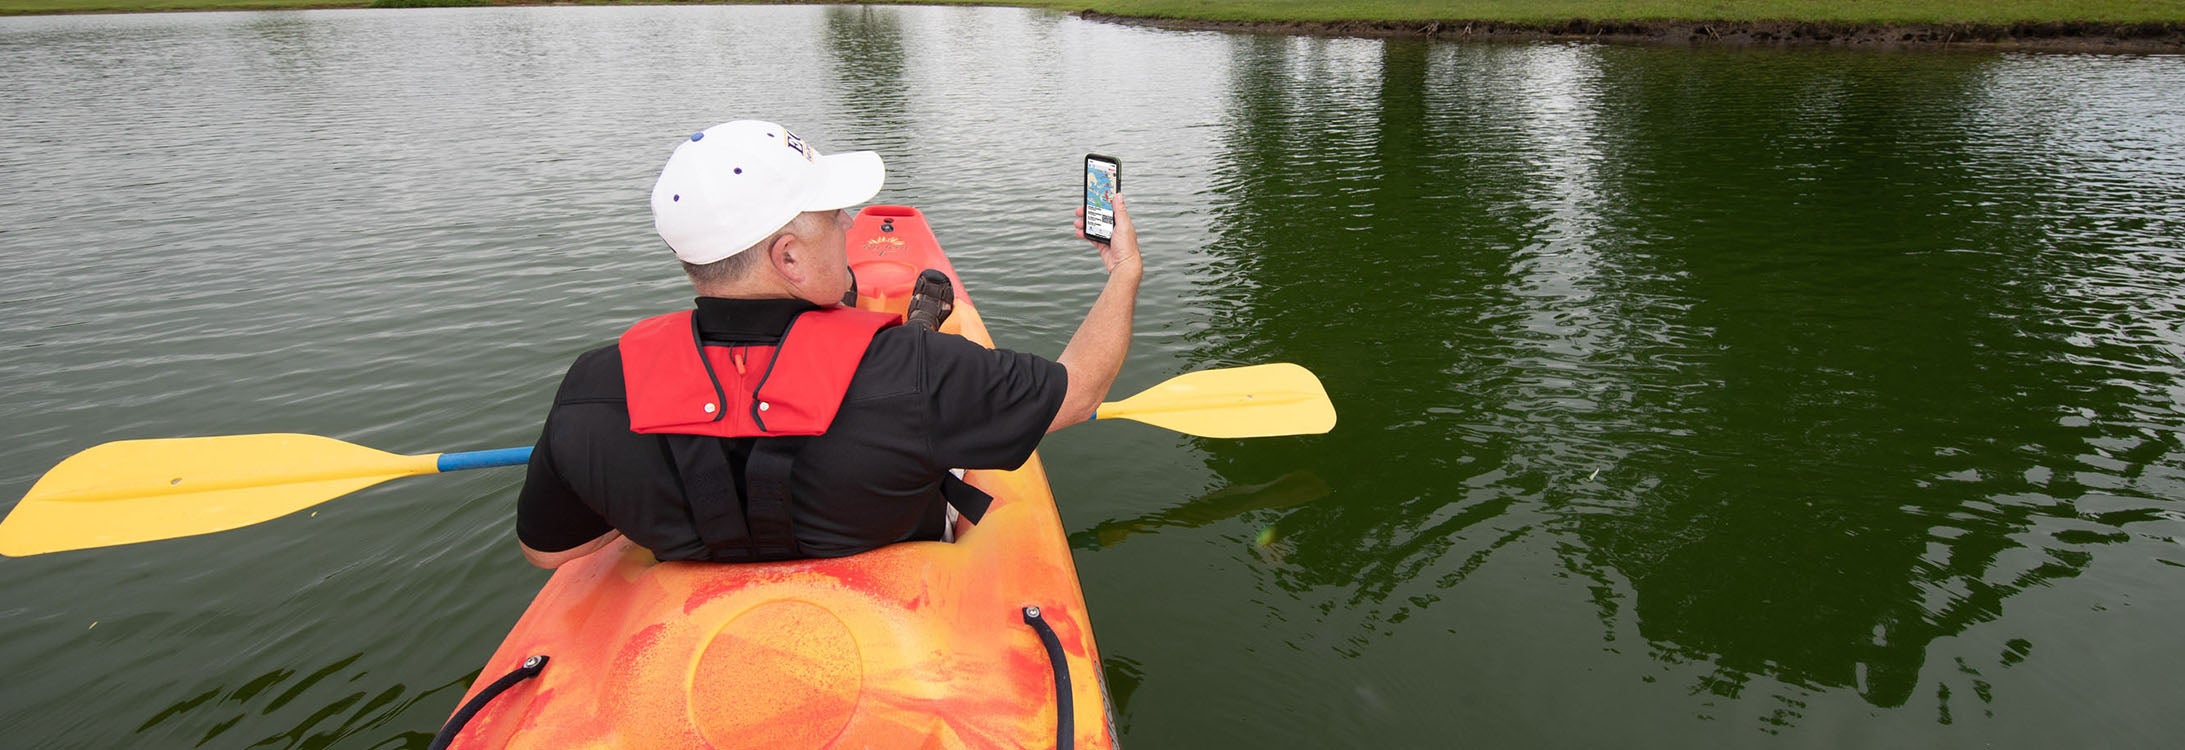 ECU professor Ernie Marshburn has developed a new approach to boating safety using an app on boaters’ phones. (Photos by Cliff Hollis)